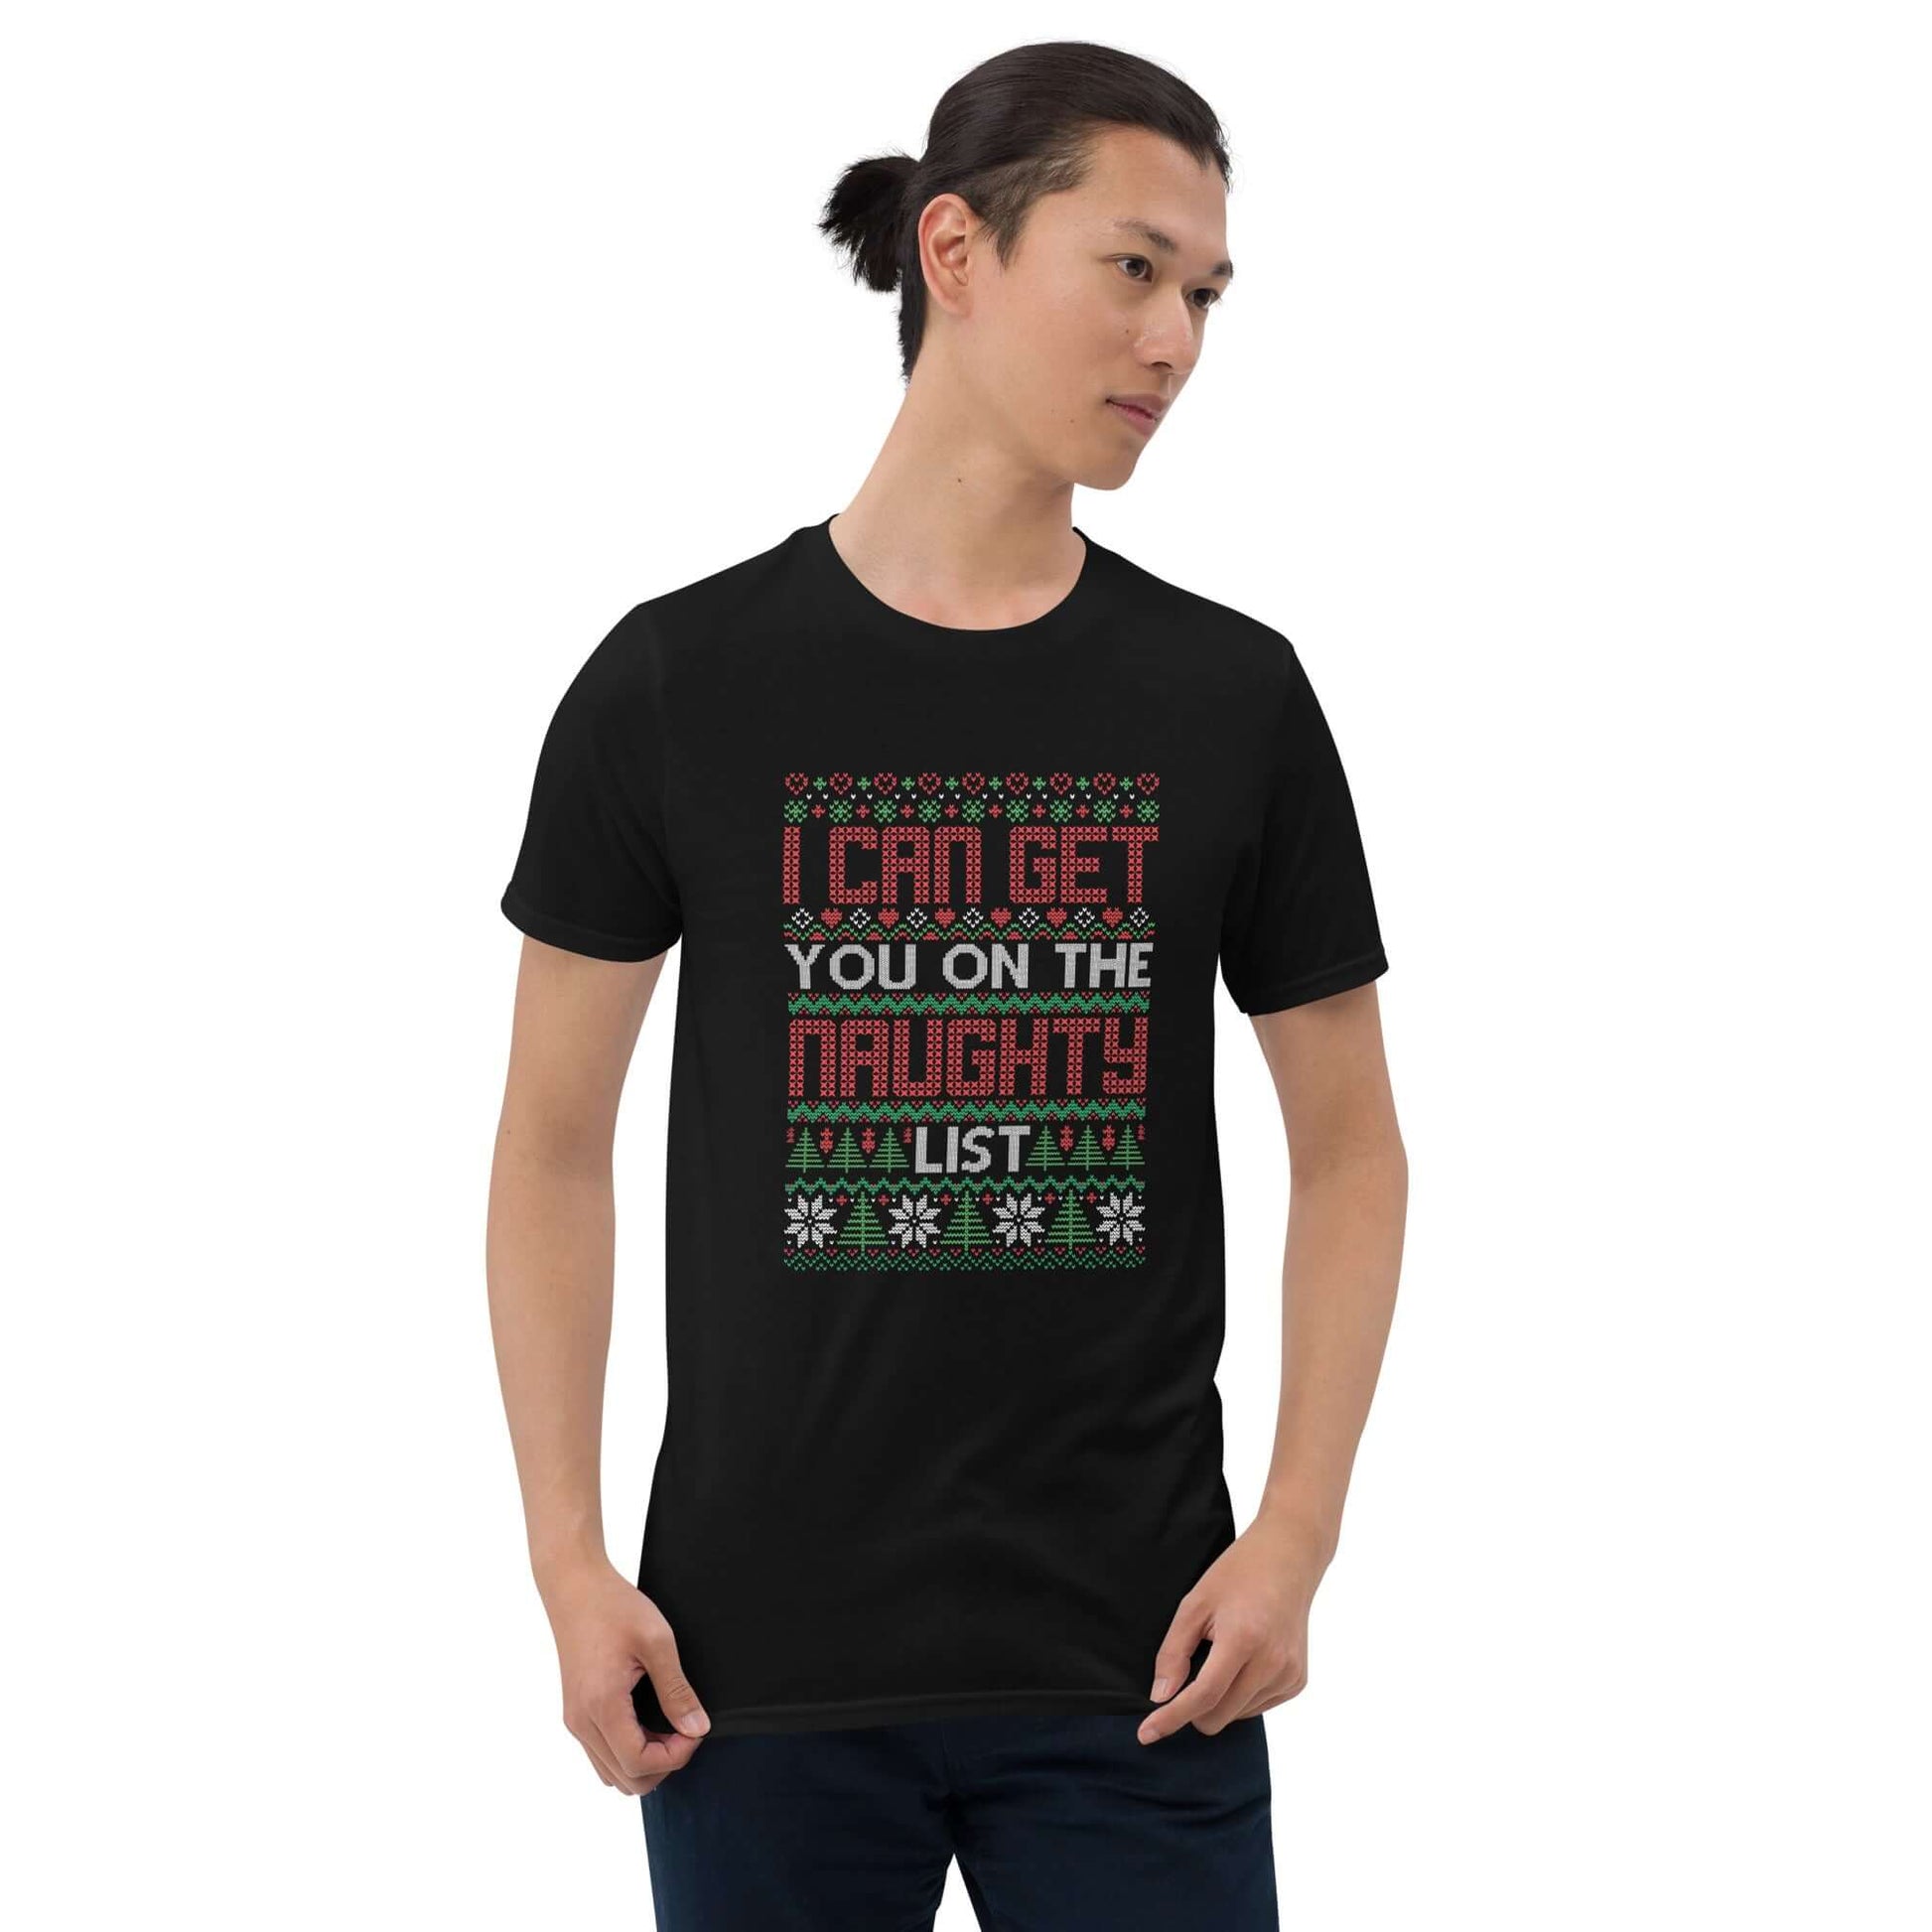 Man wearing black t-shirt with the words I can get you on the naught list printed on the front. 